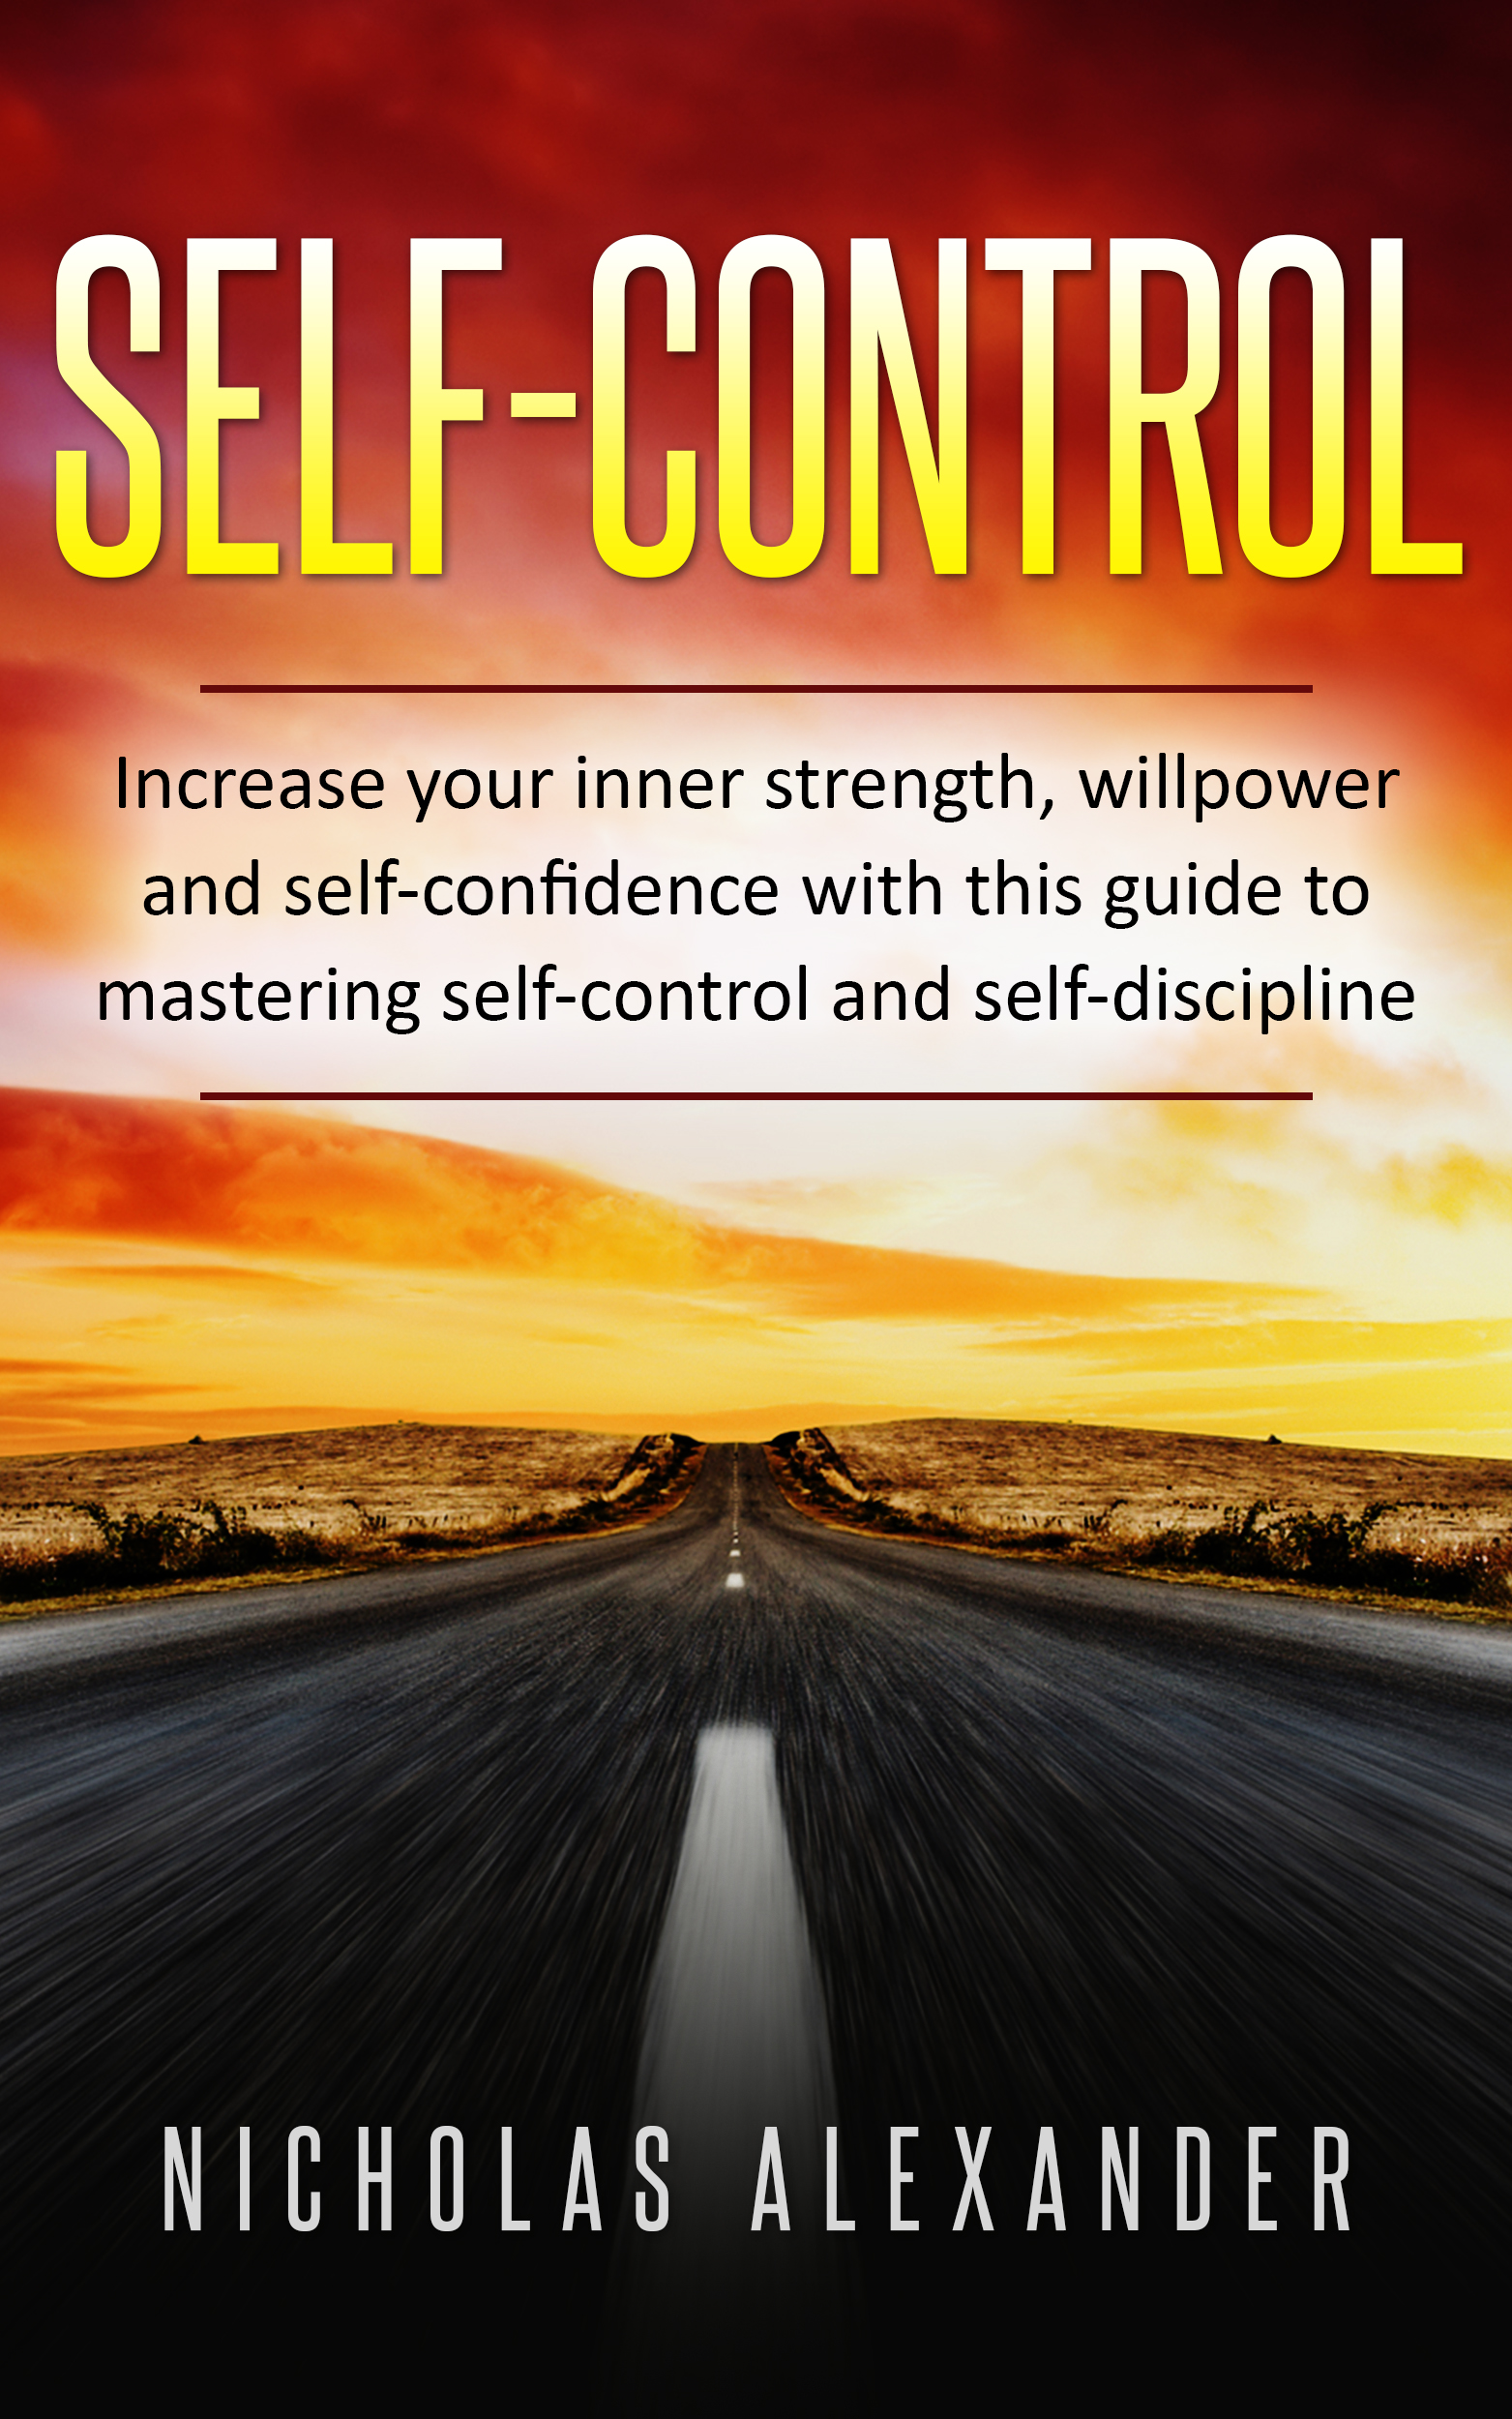 FREE: Self-Control: Increase Your Inner Strength, Willpower and Self-Confidence with this Guide to Mastering Self-Control and Self-Discipline by Nicholas Alexander